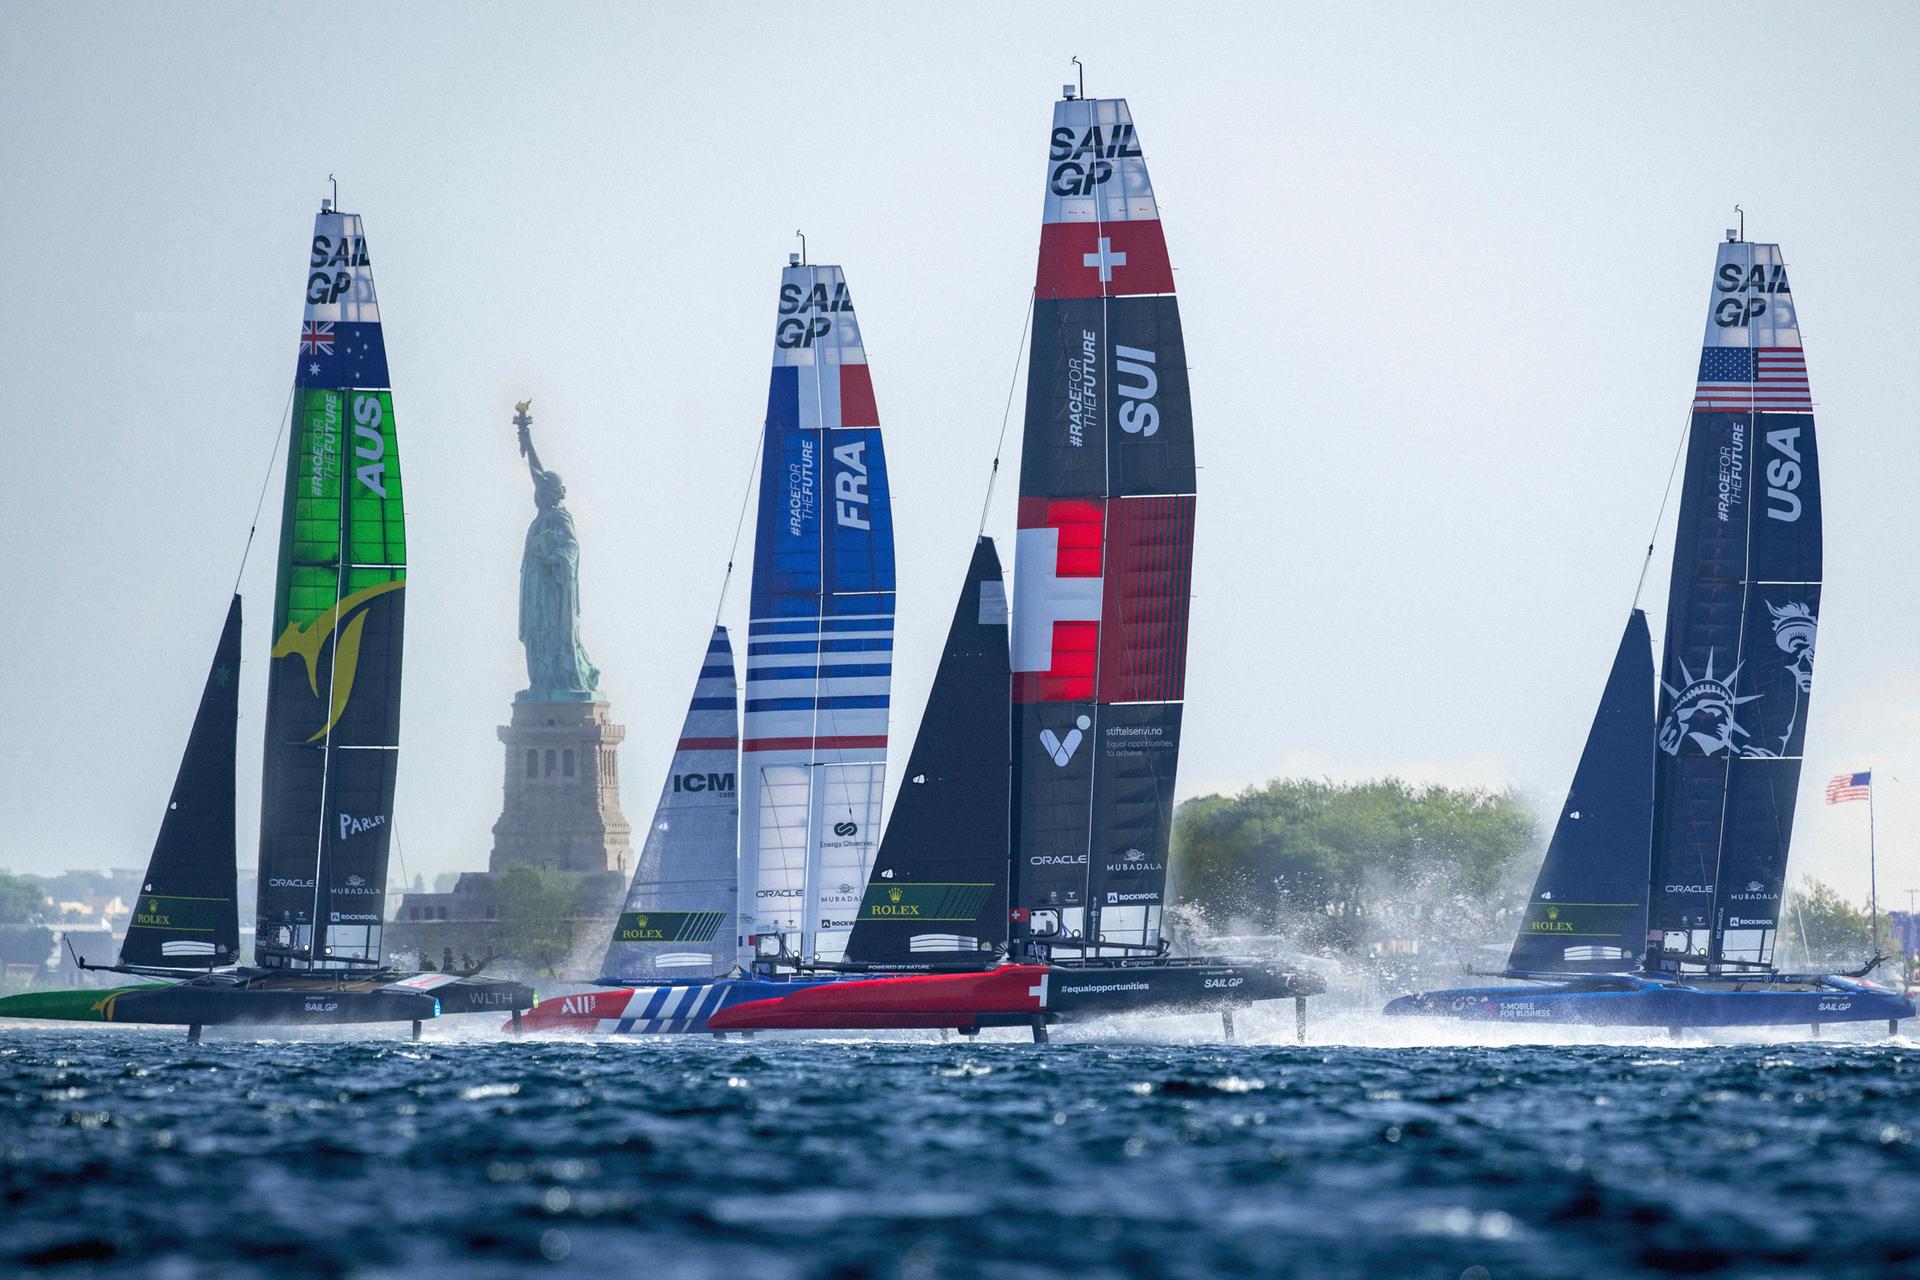 Sailboats competing in Sail GP near the statue of liberty